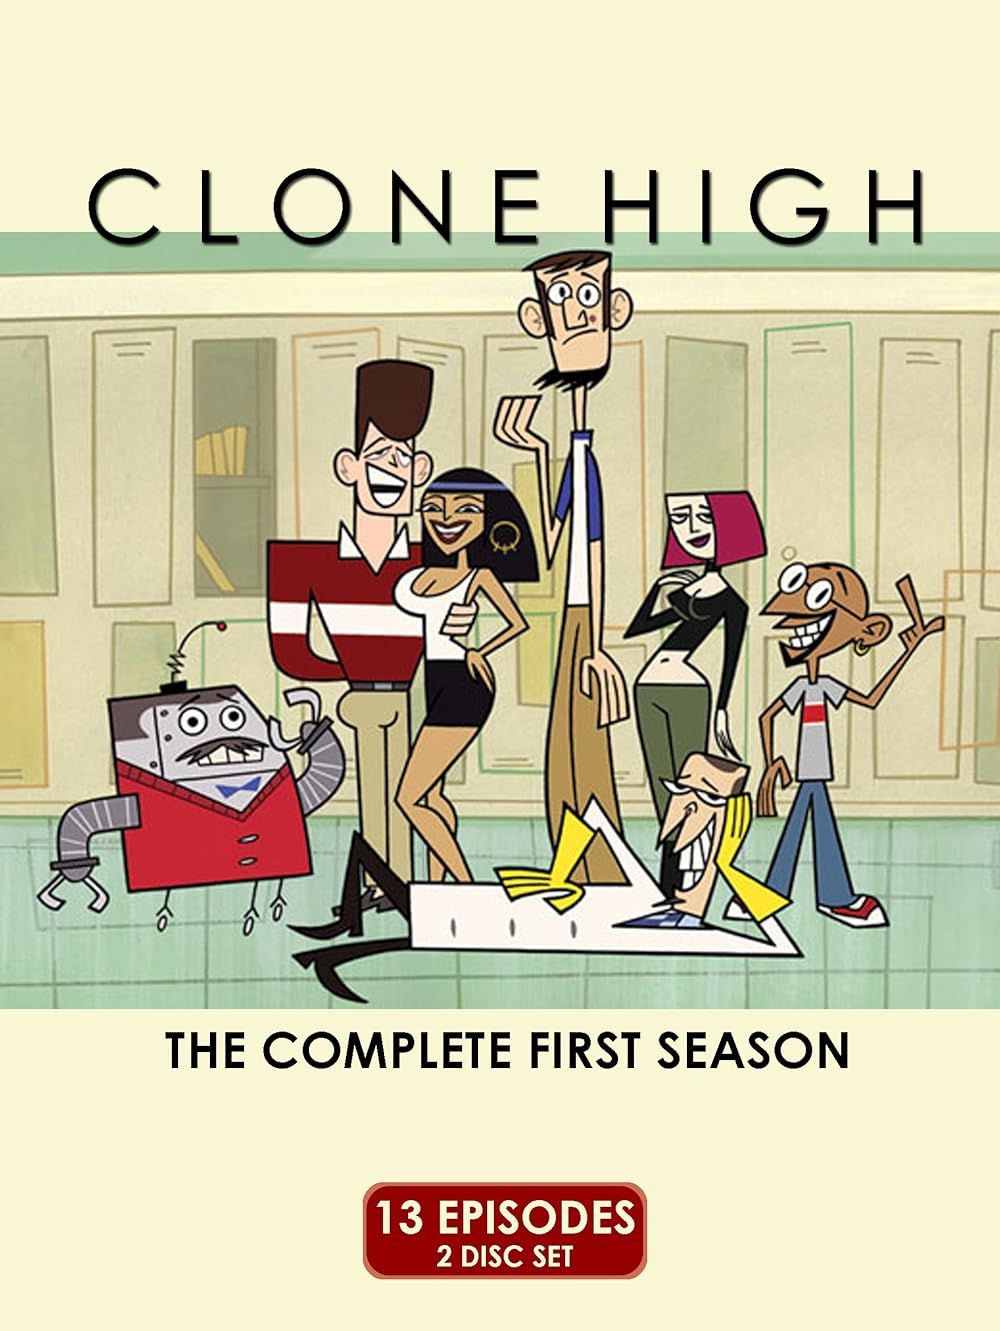 The Cast on the Clone High Promo